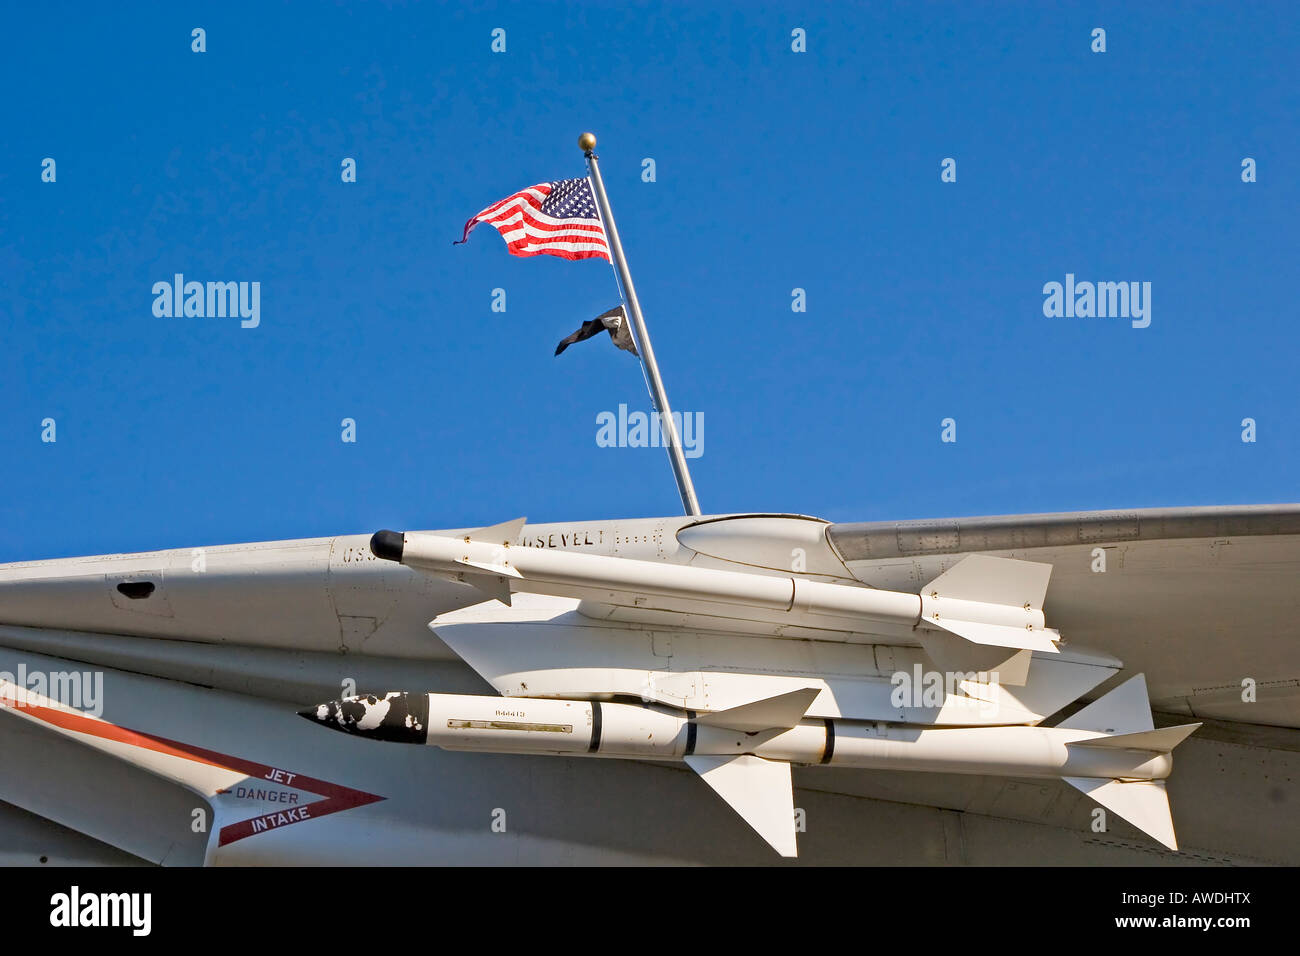 Missles under the wing of a fighter jet against blue sky with American flag and POW flag in background Stock Photo